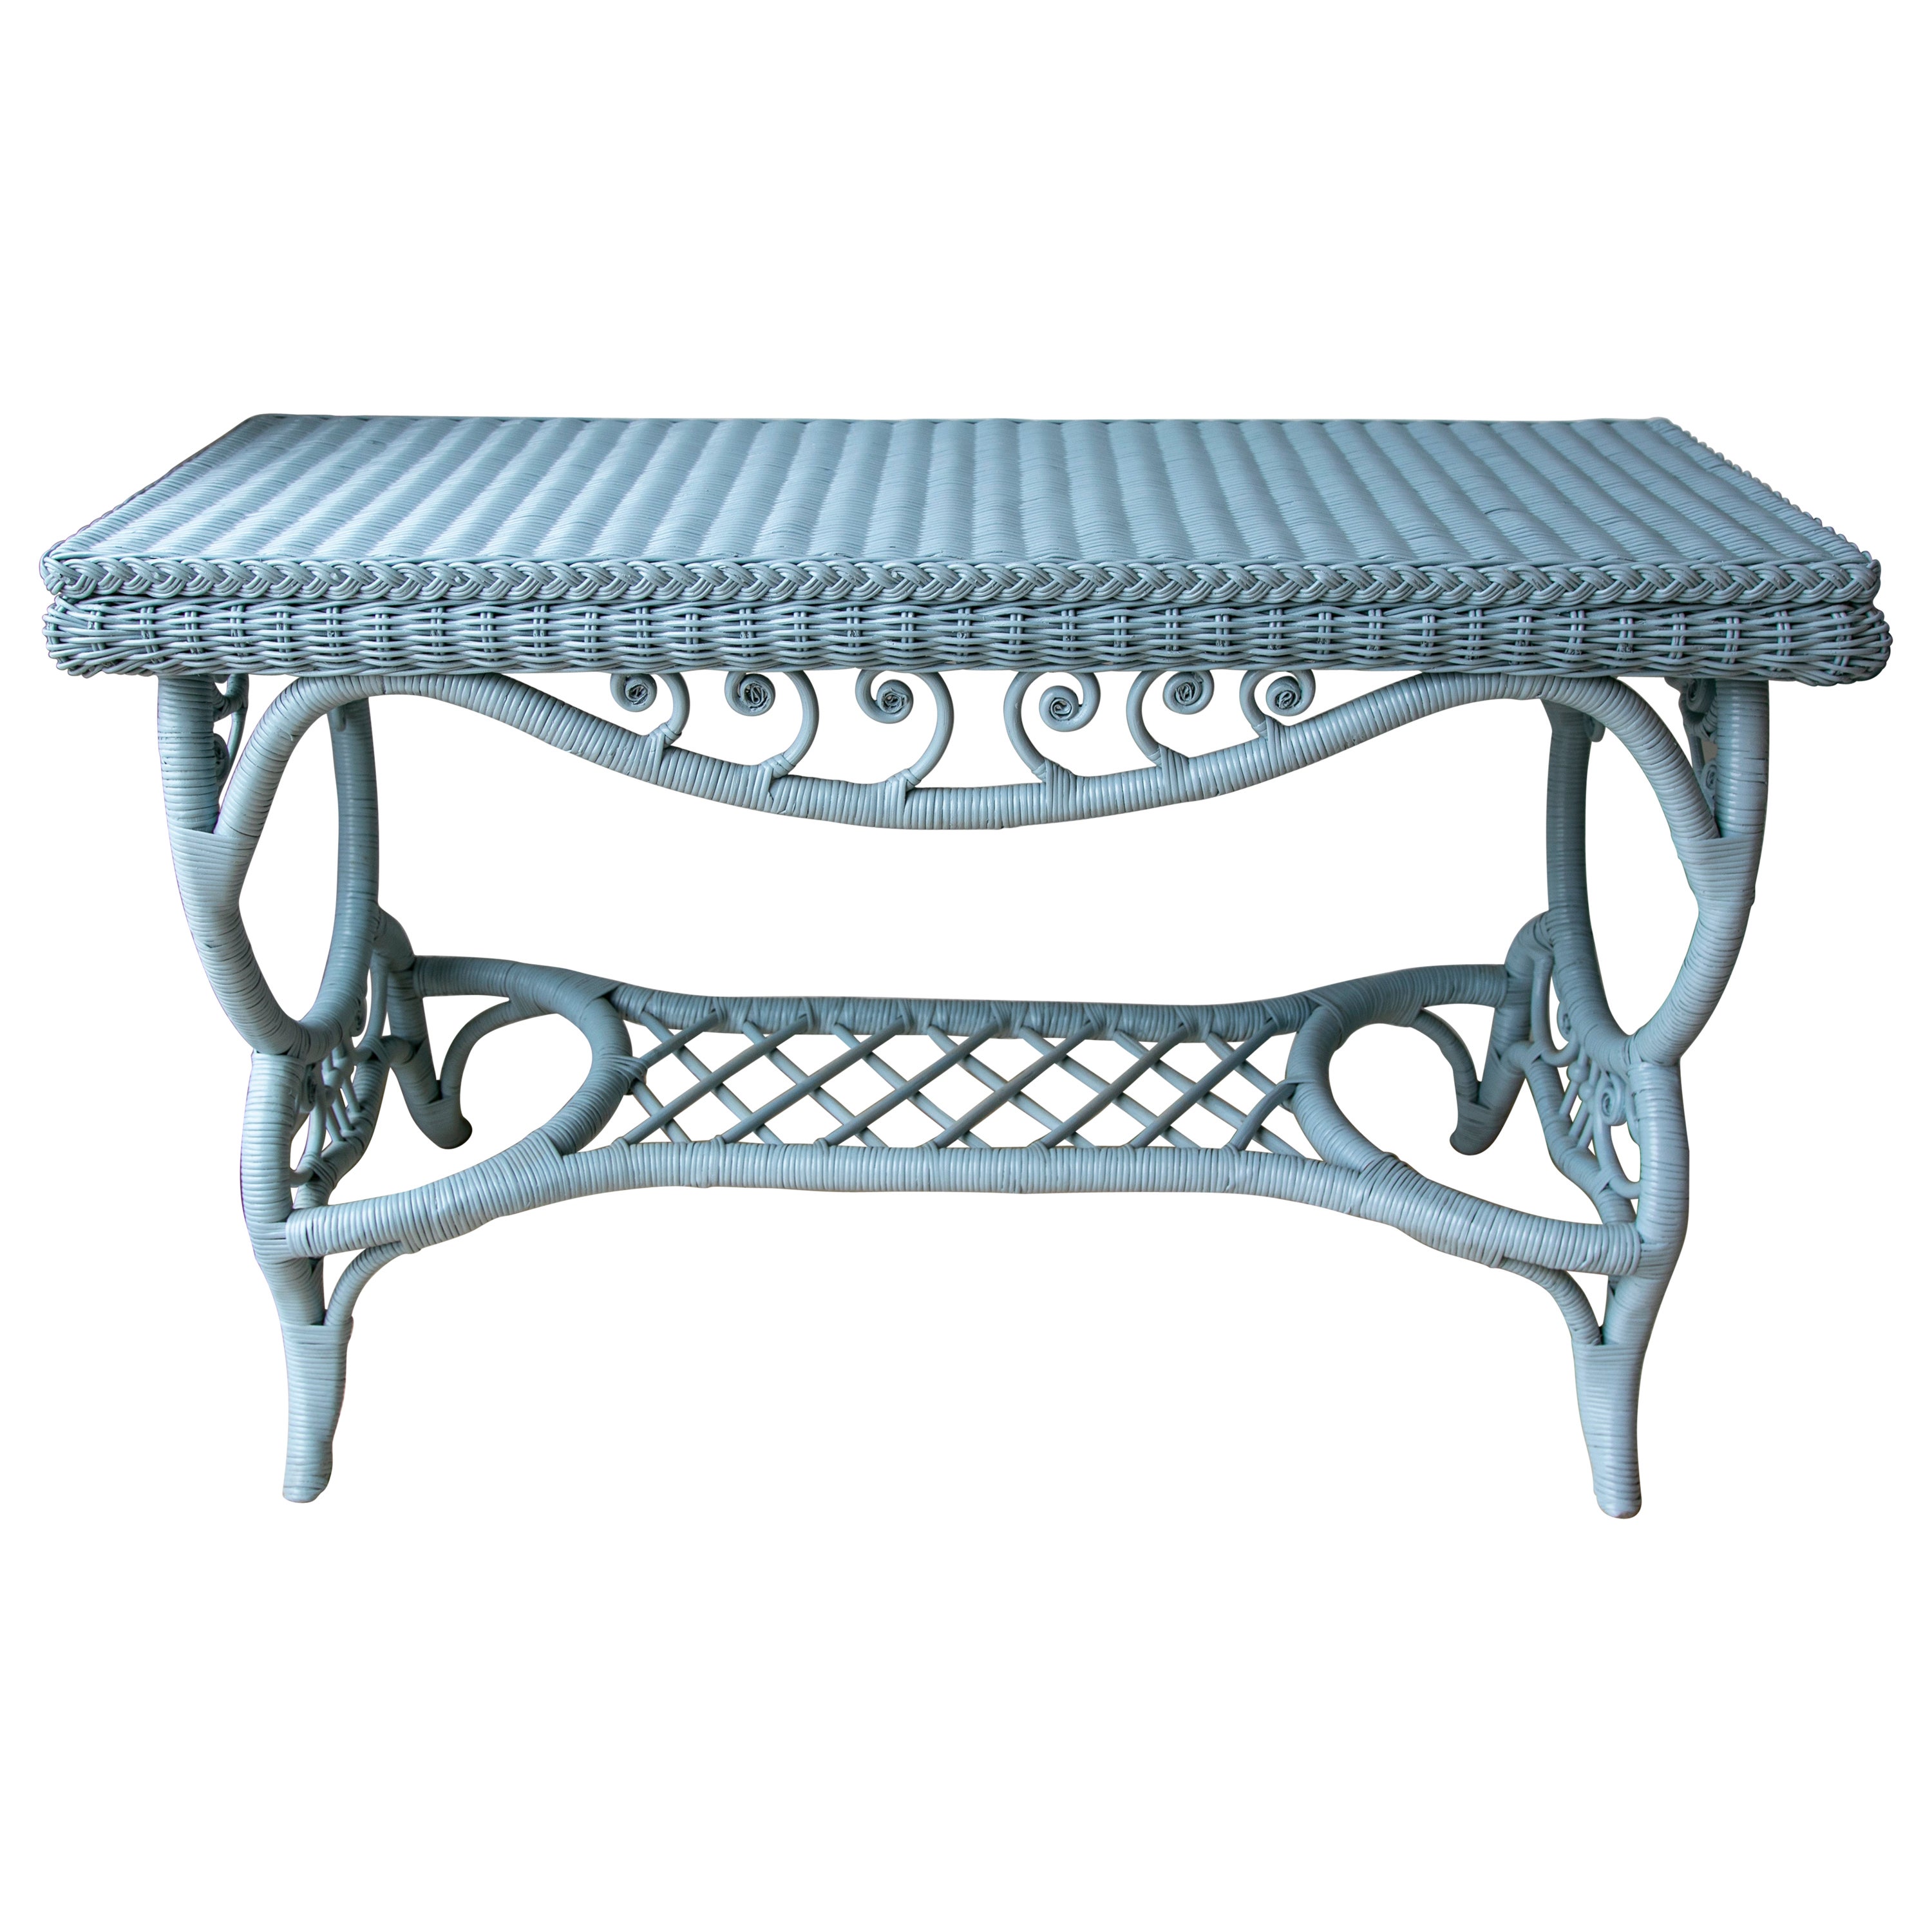 Spanish Handmade Wicker Console Lacquered in Blue Colour